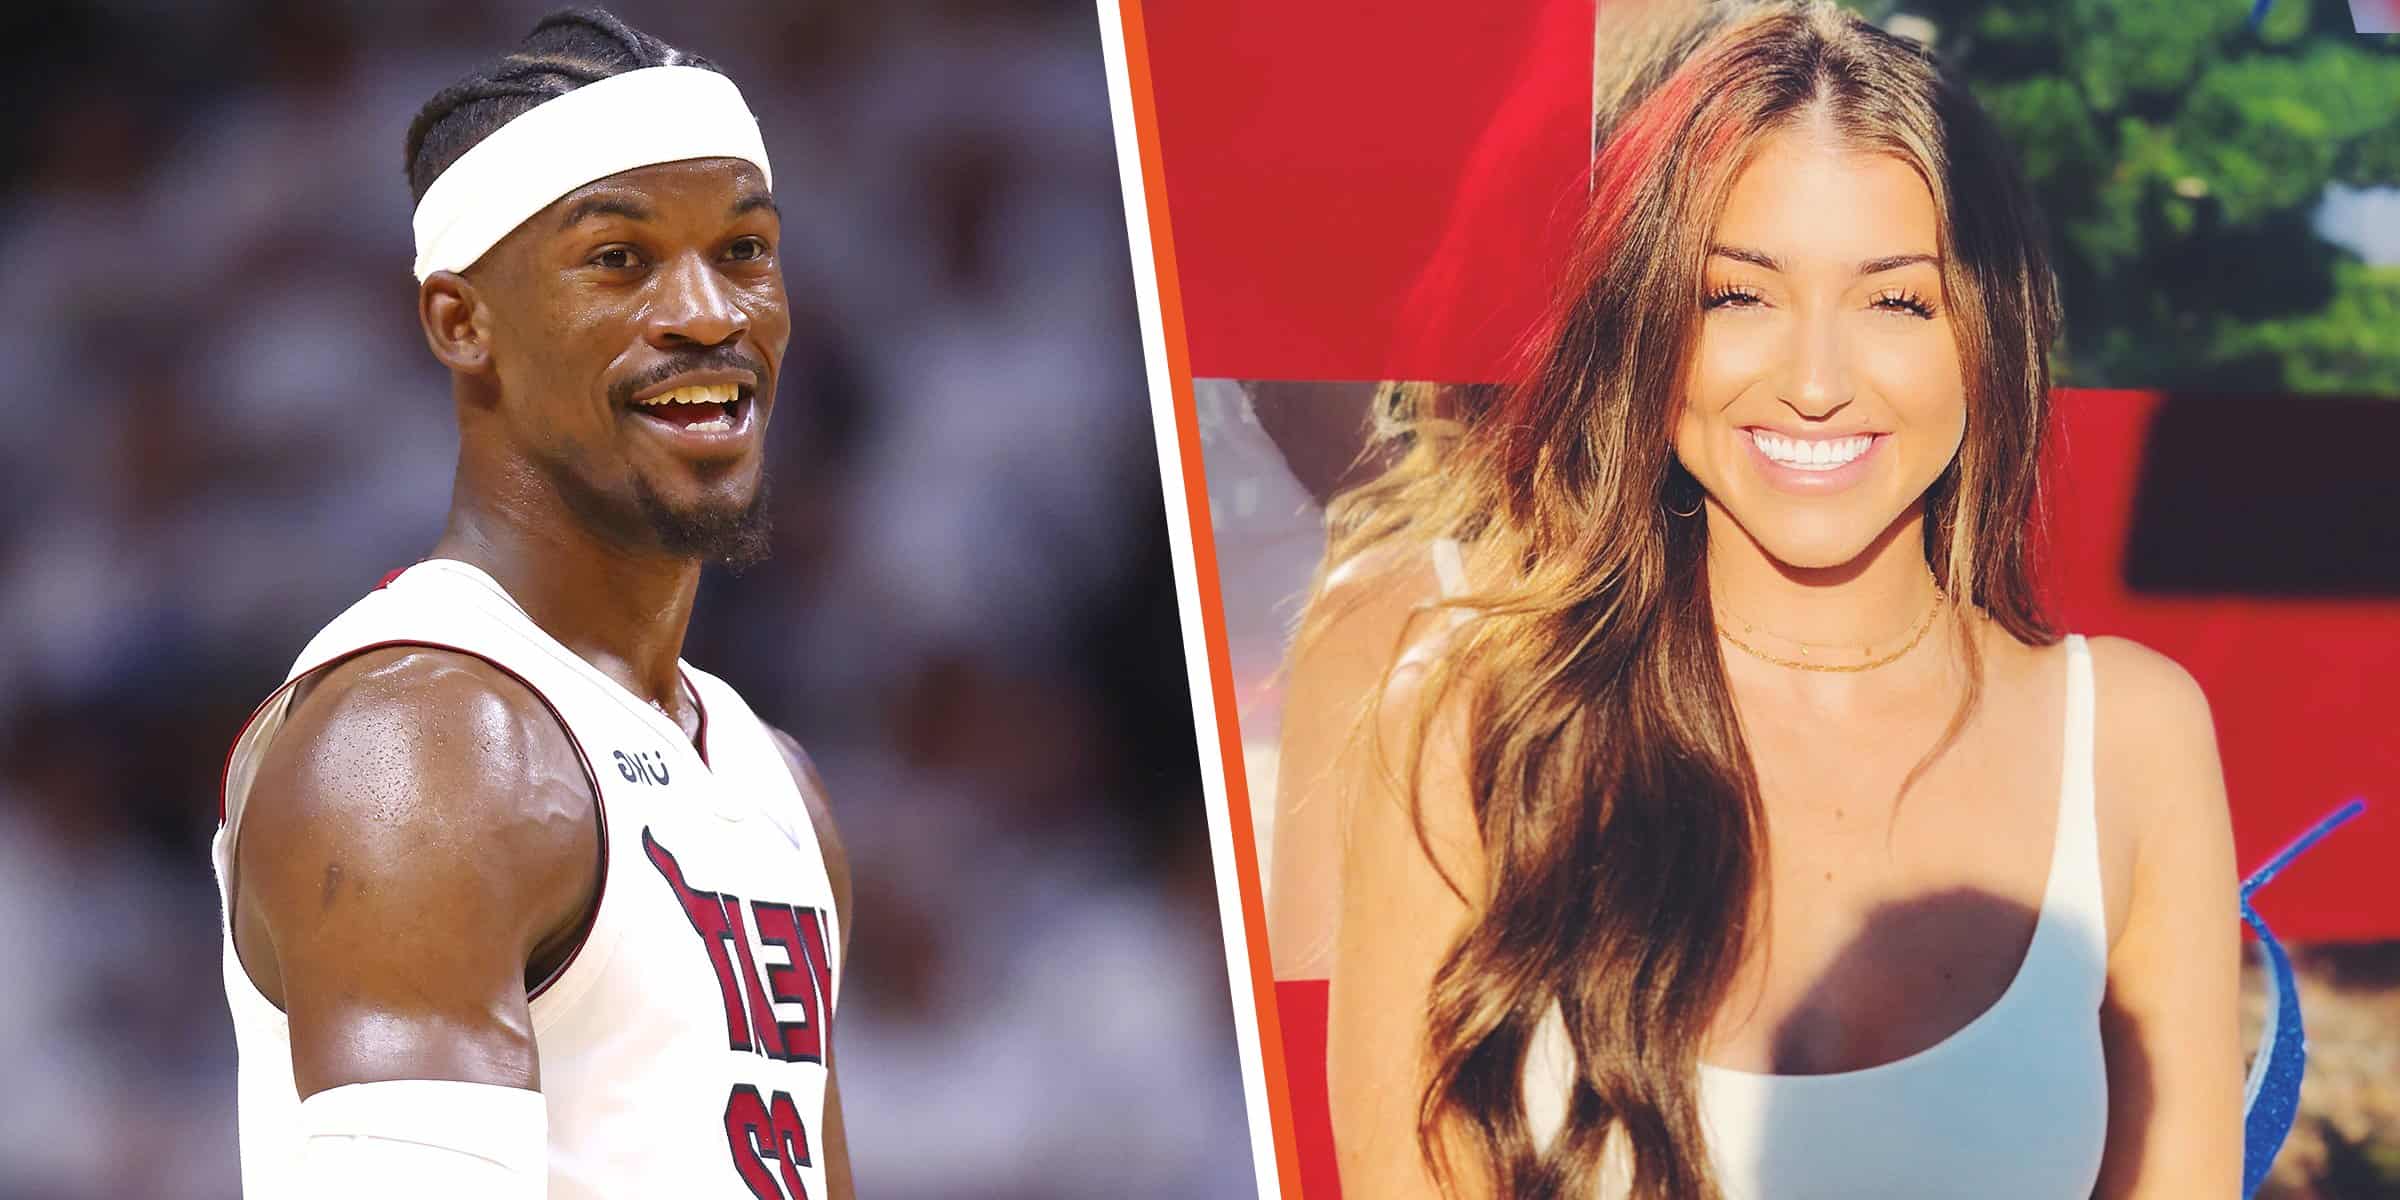 Who is Jimmy Butler's baby momma